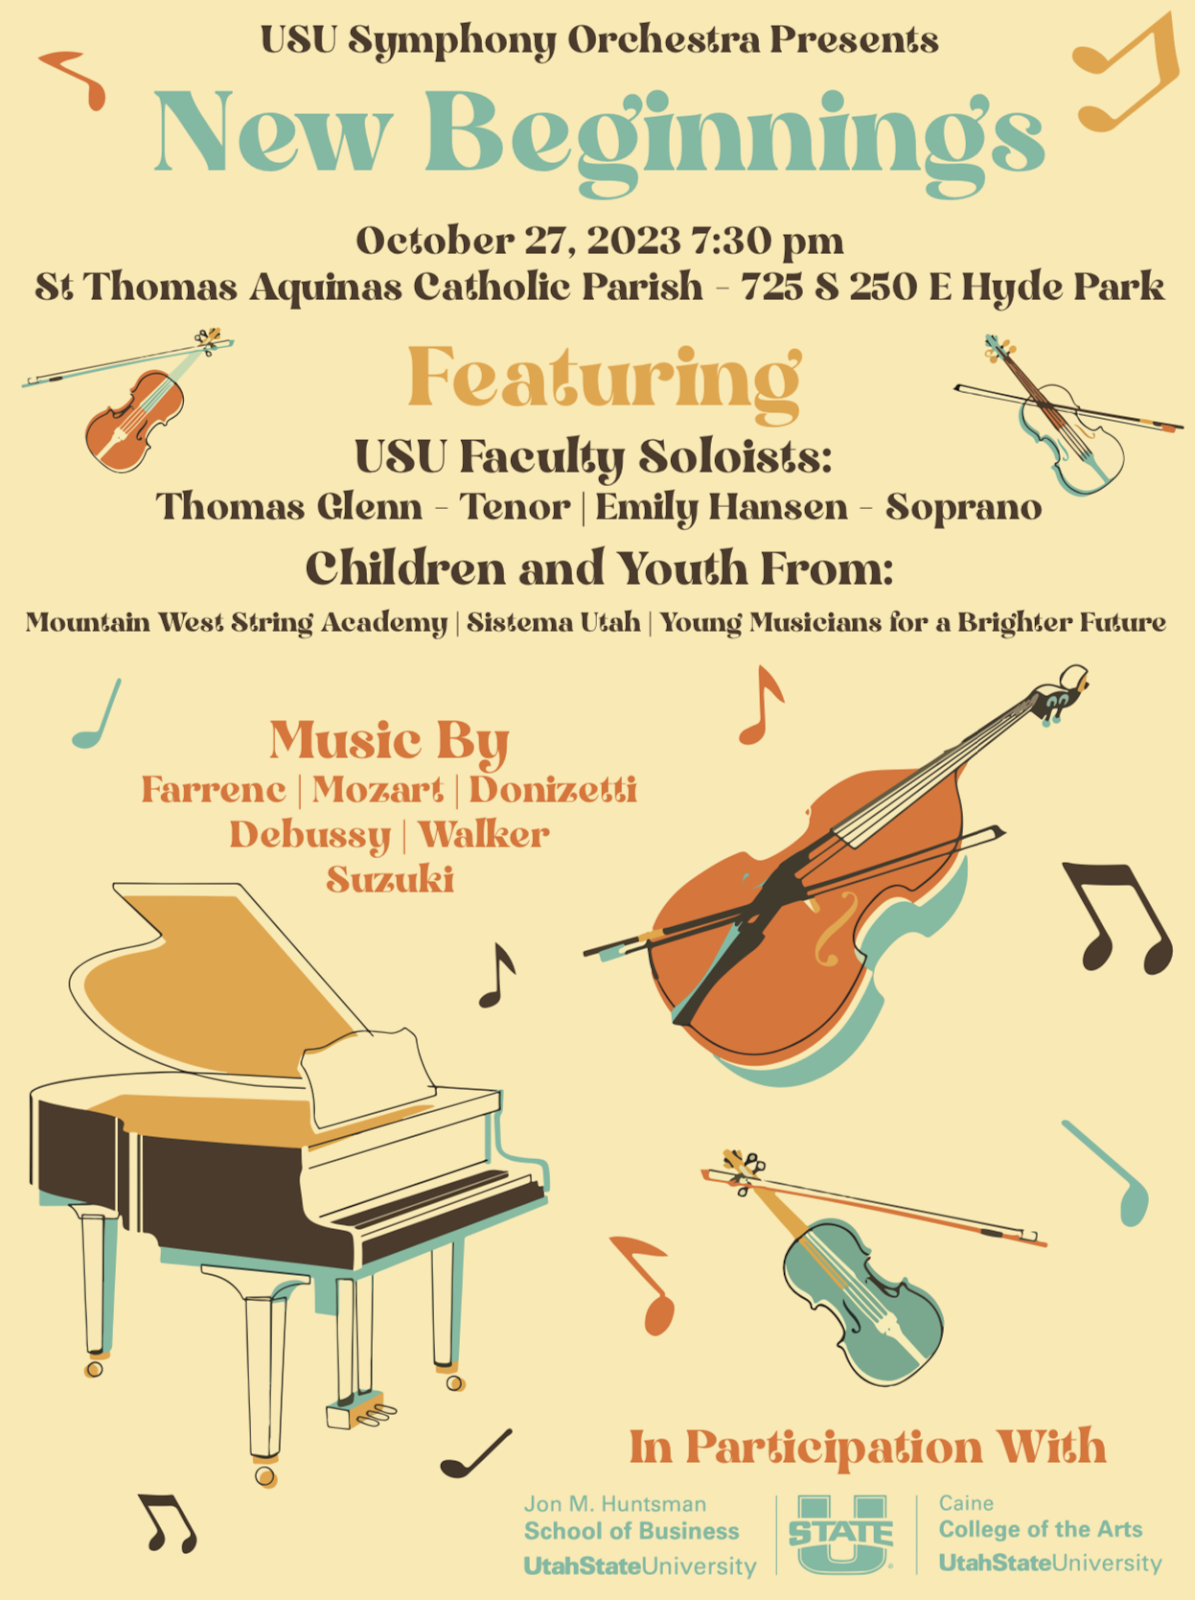 Sistema Strings plays with the Utah University Symphony Orchestra